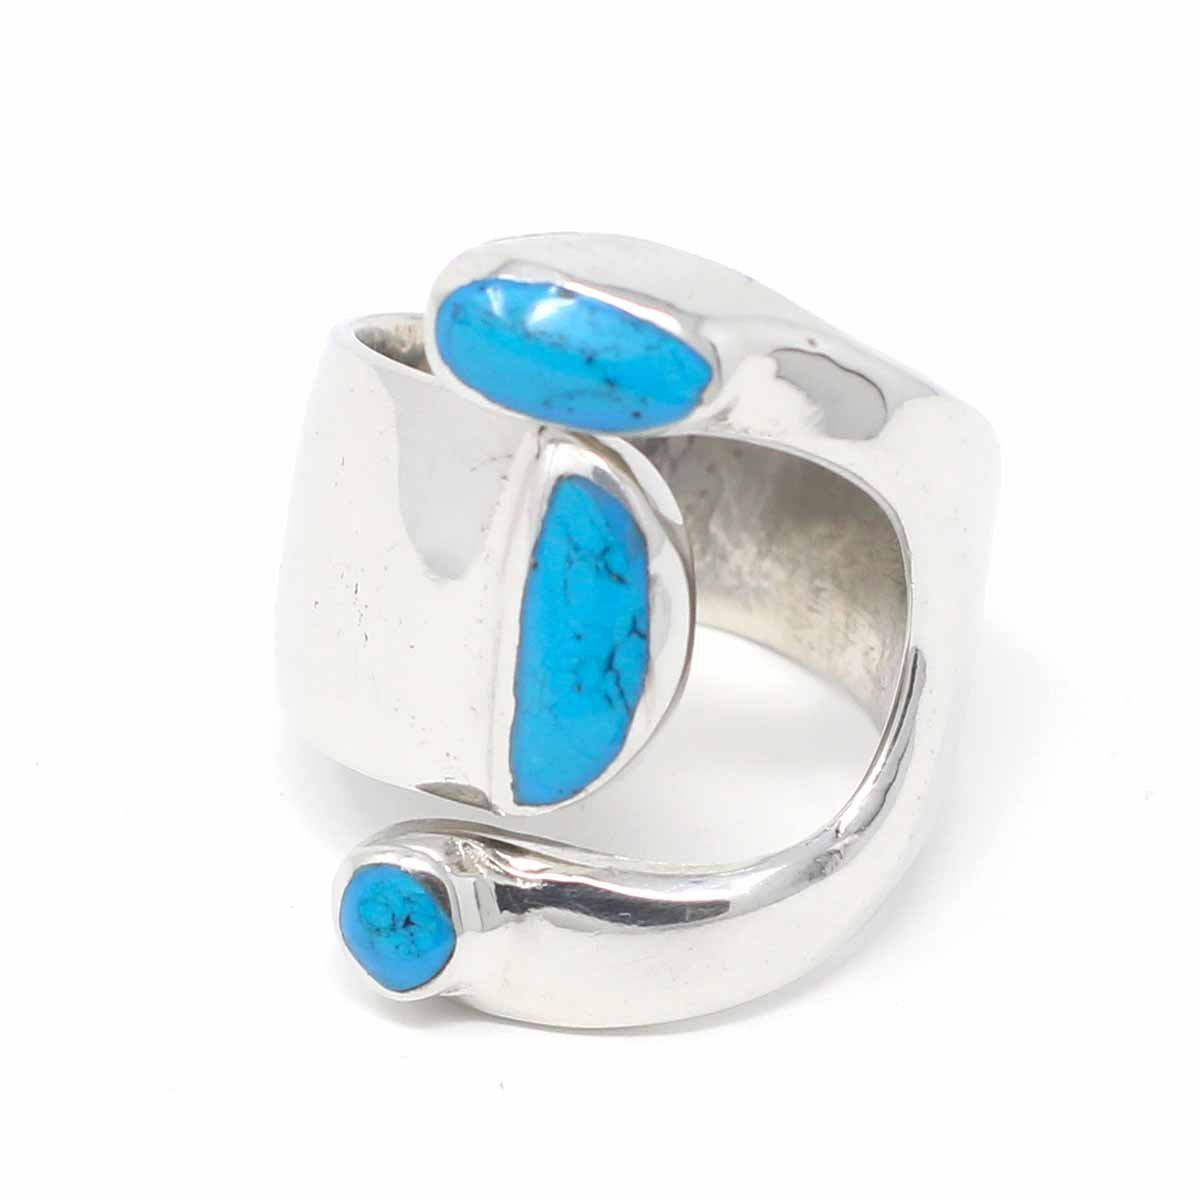 Alpaca Silver Wrap Ring, Turquoise - Size 8